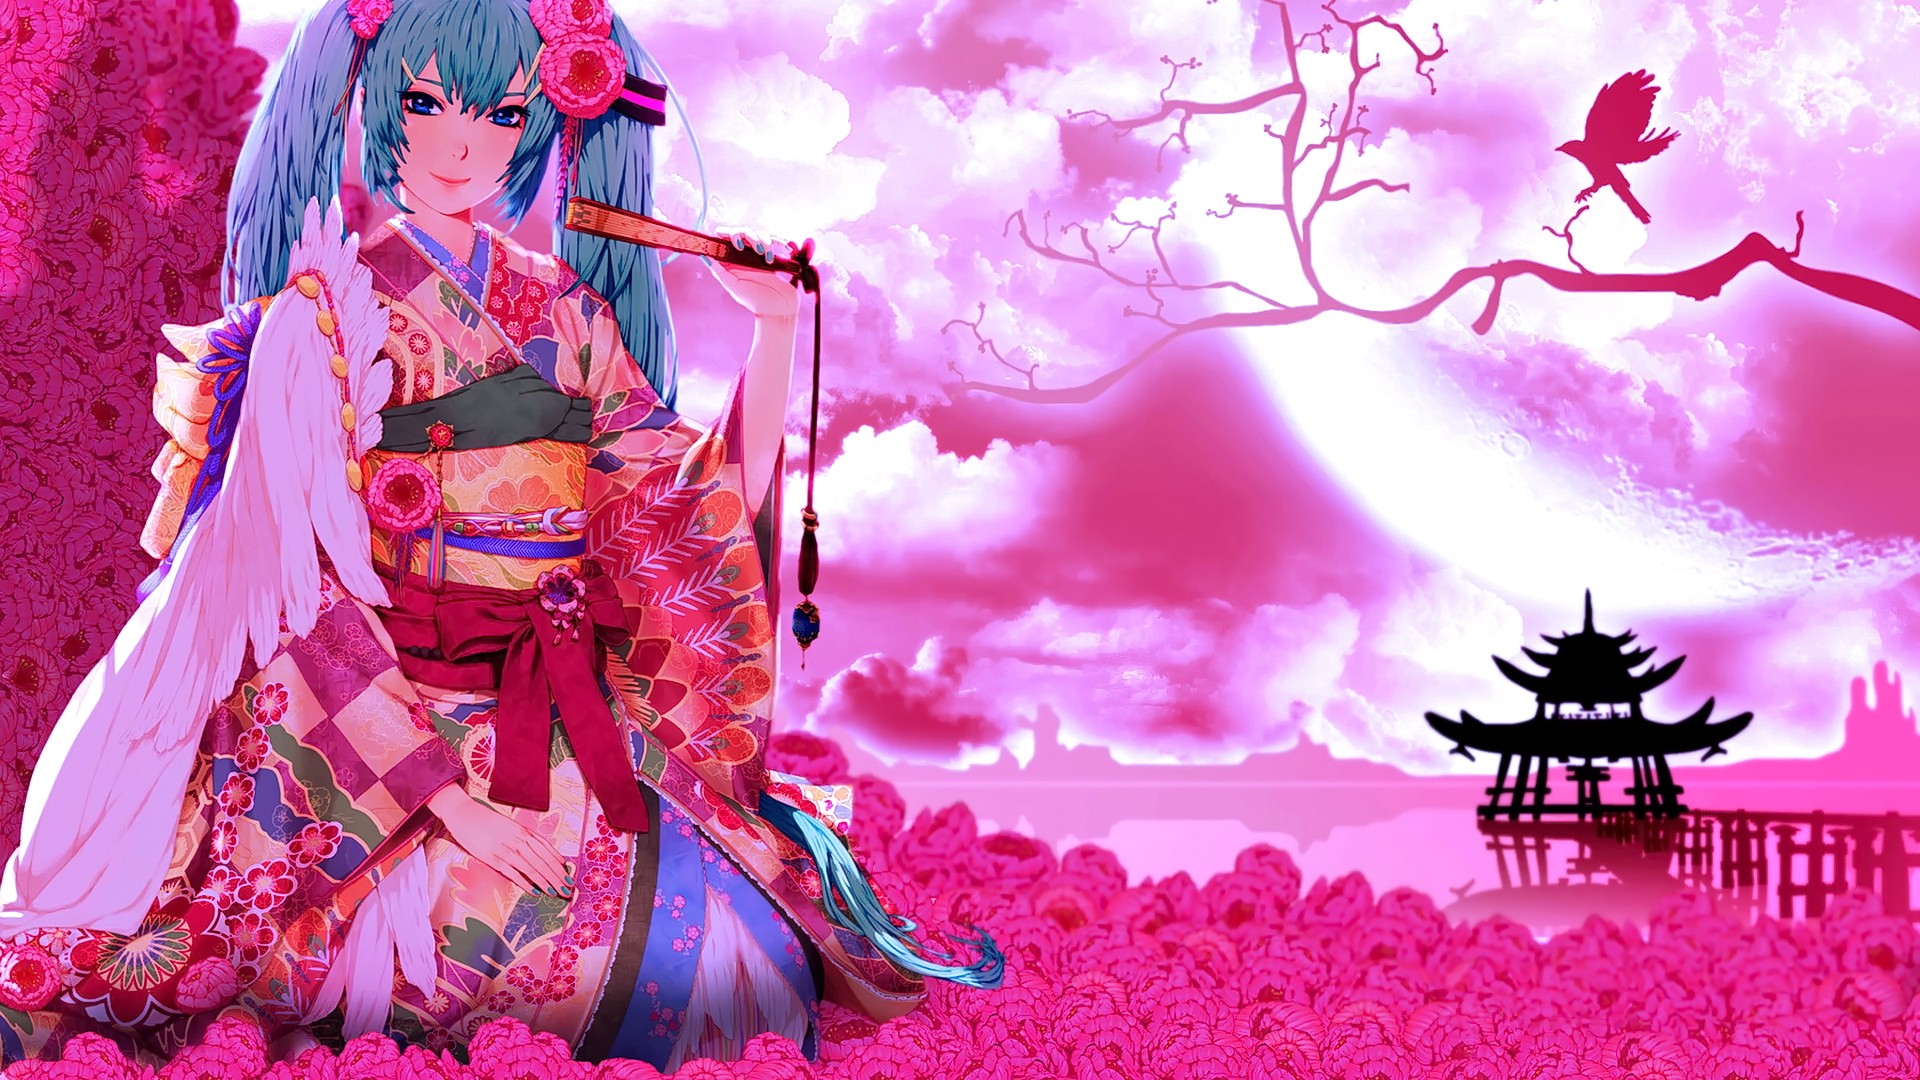 Anime 1920x1080 anime anime girls cyan hair long hair blue eyes looking at viewer flowers Asian architecture Japanese clothes kimono hair ornament Vocaloid Hatsune Miku fantasy art fantasy girl women traditional clothing